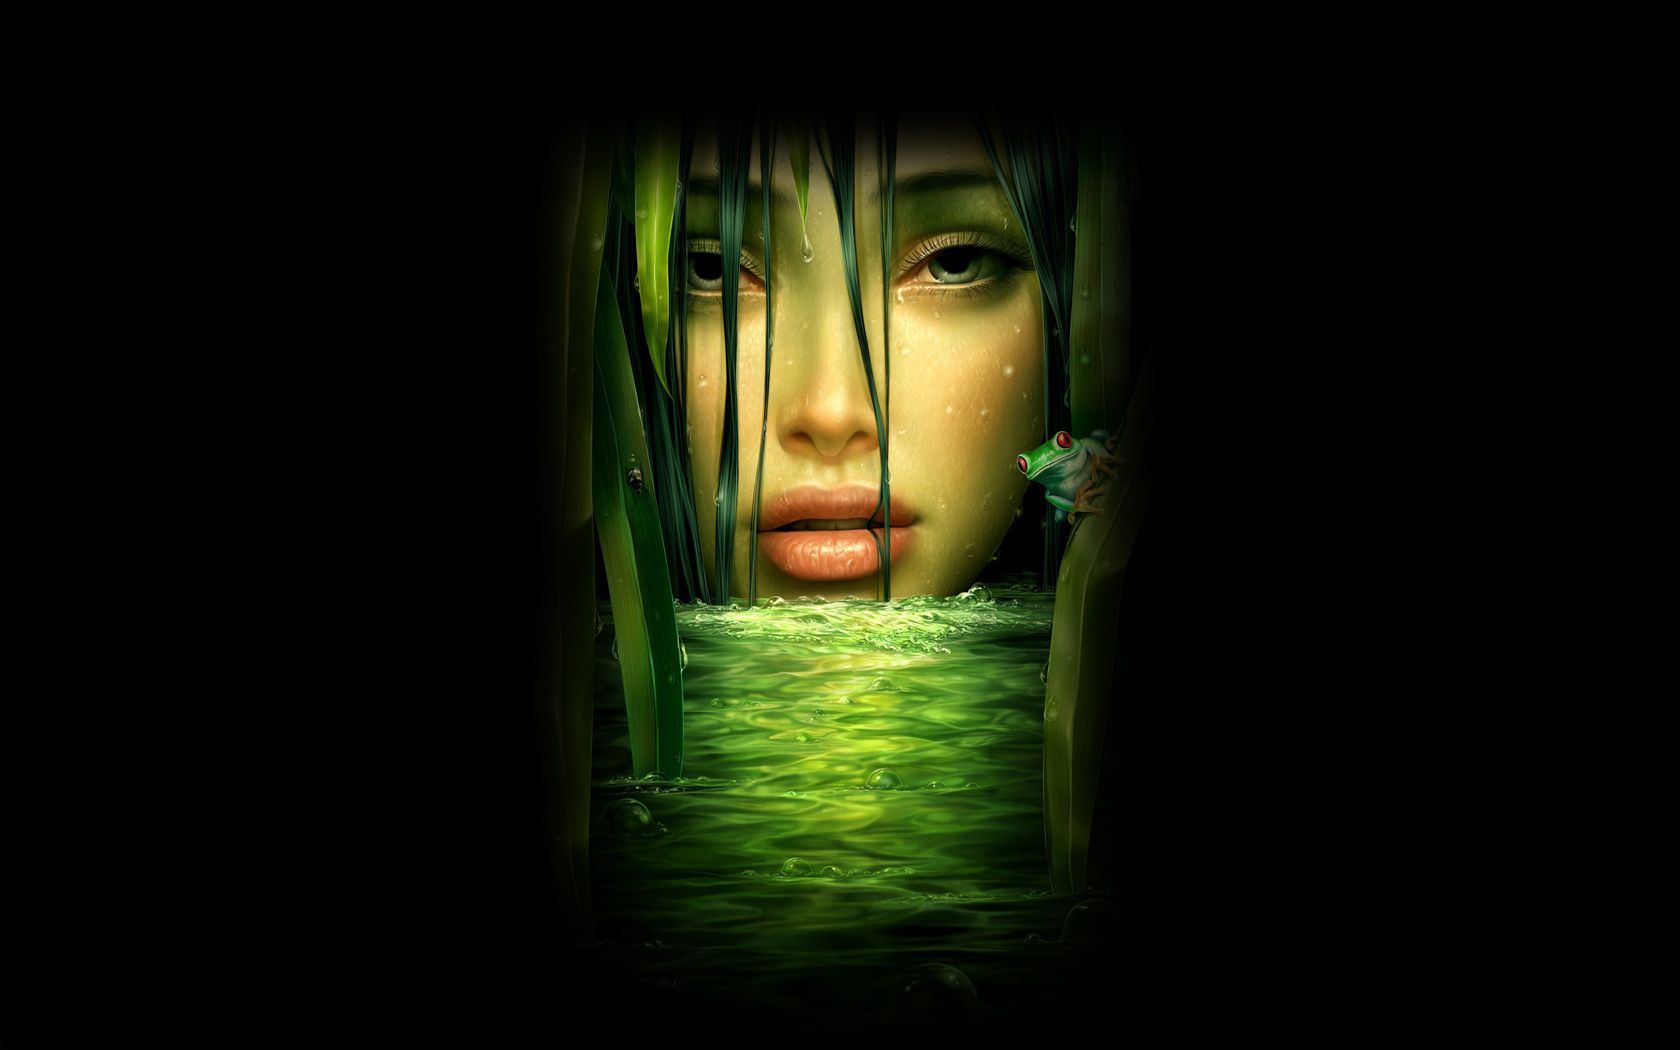 Beautiful Green Girl Face on Black Background. Black background wallpaper, Green girl, Black background